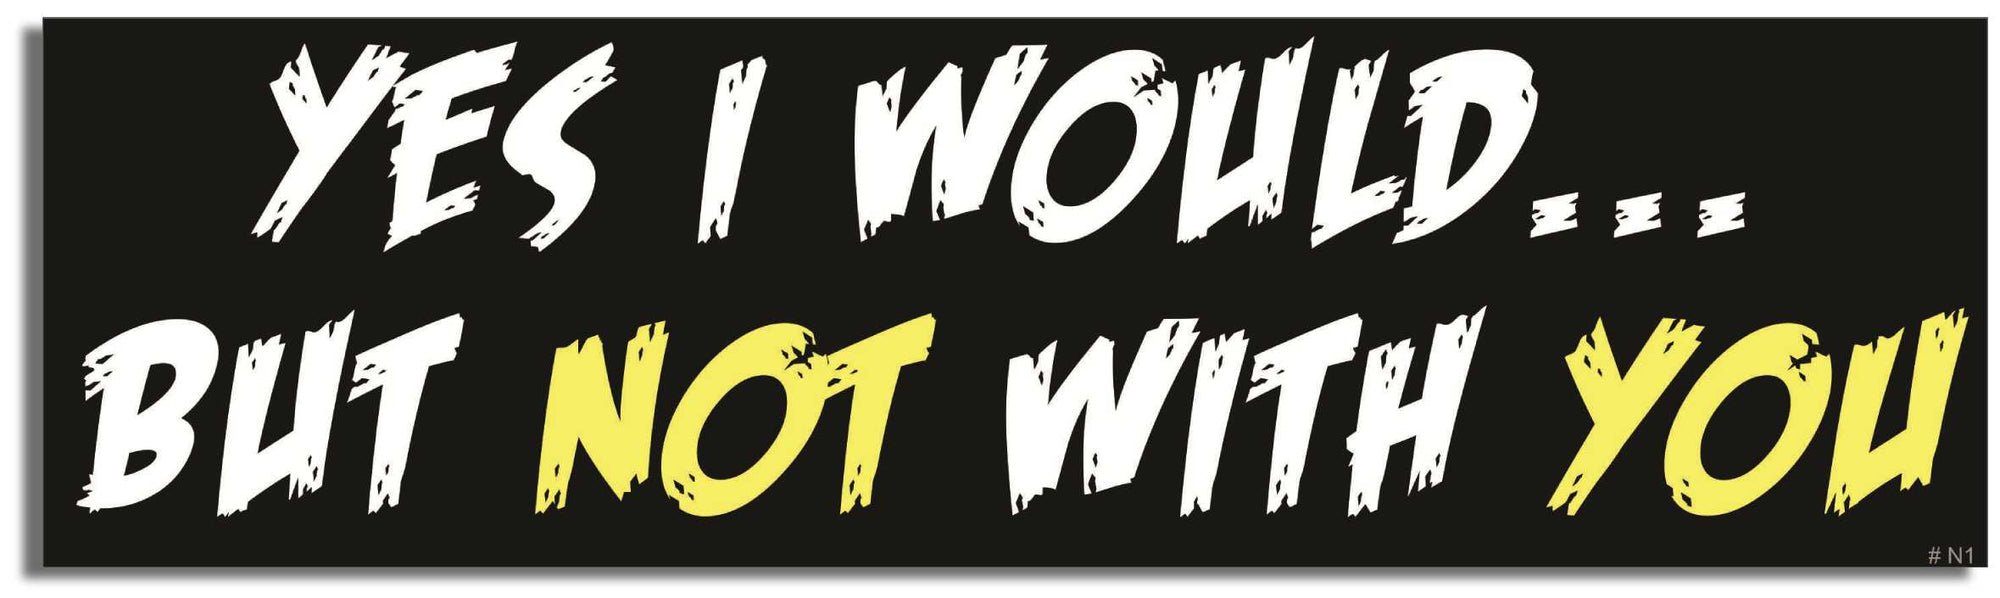 Yes I would, but not with you - 3" x 10" Bumper Sticker--Car Magnet- -  Decal Car Car Magnet-dirty Bumper Sticker Car Magnet Yes I would, but not with you-  Decal for carsadult, funny, funny quote, funny saying, naughty